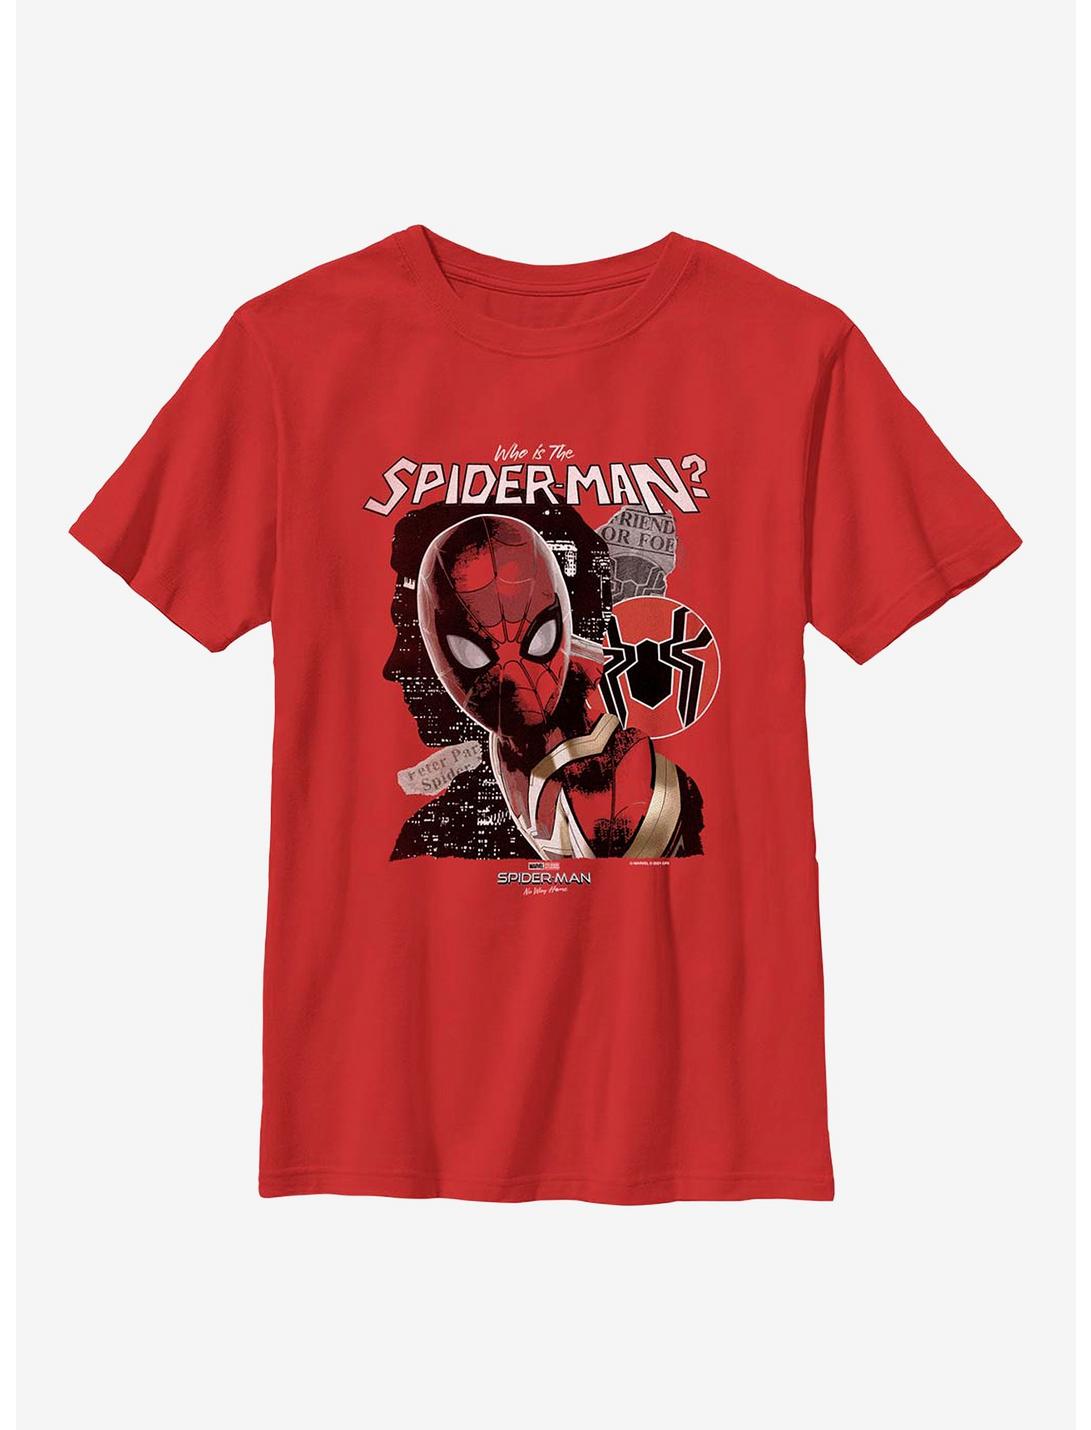 Marvel Spider-Man: No Way Home Unmasked Man Youth T-Shirt, RED, hi-res